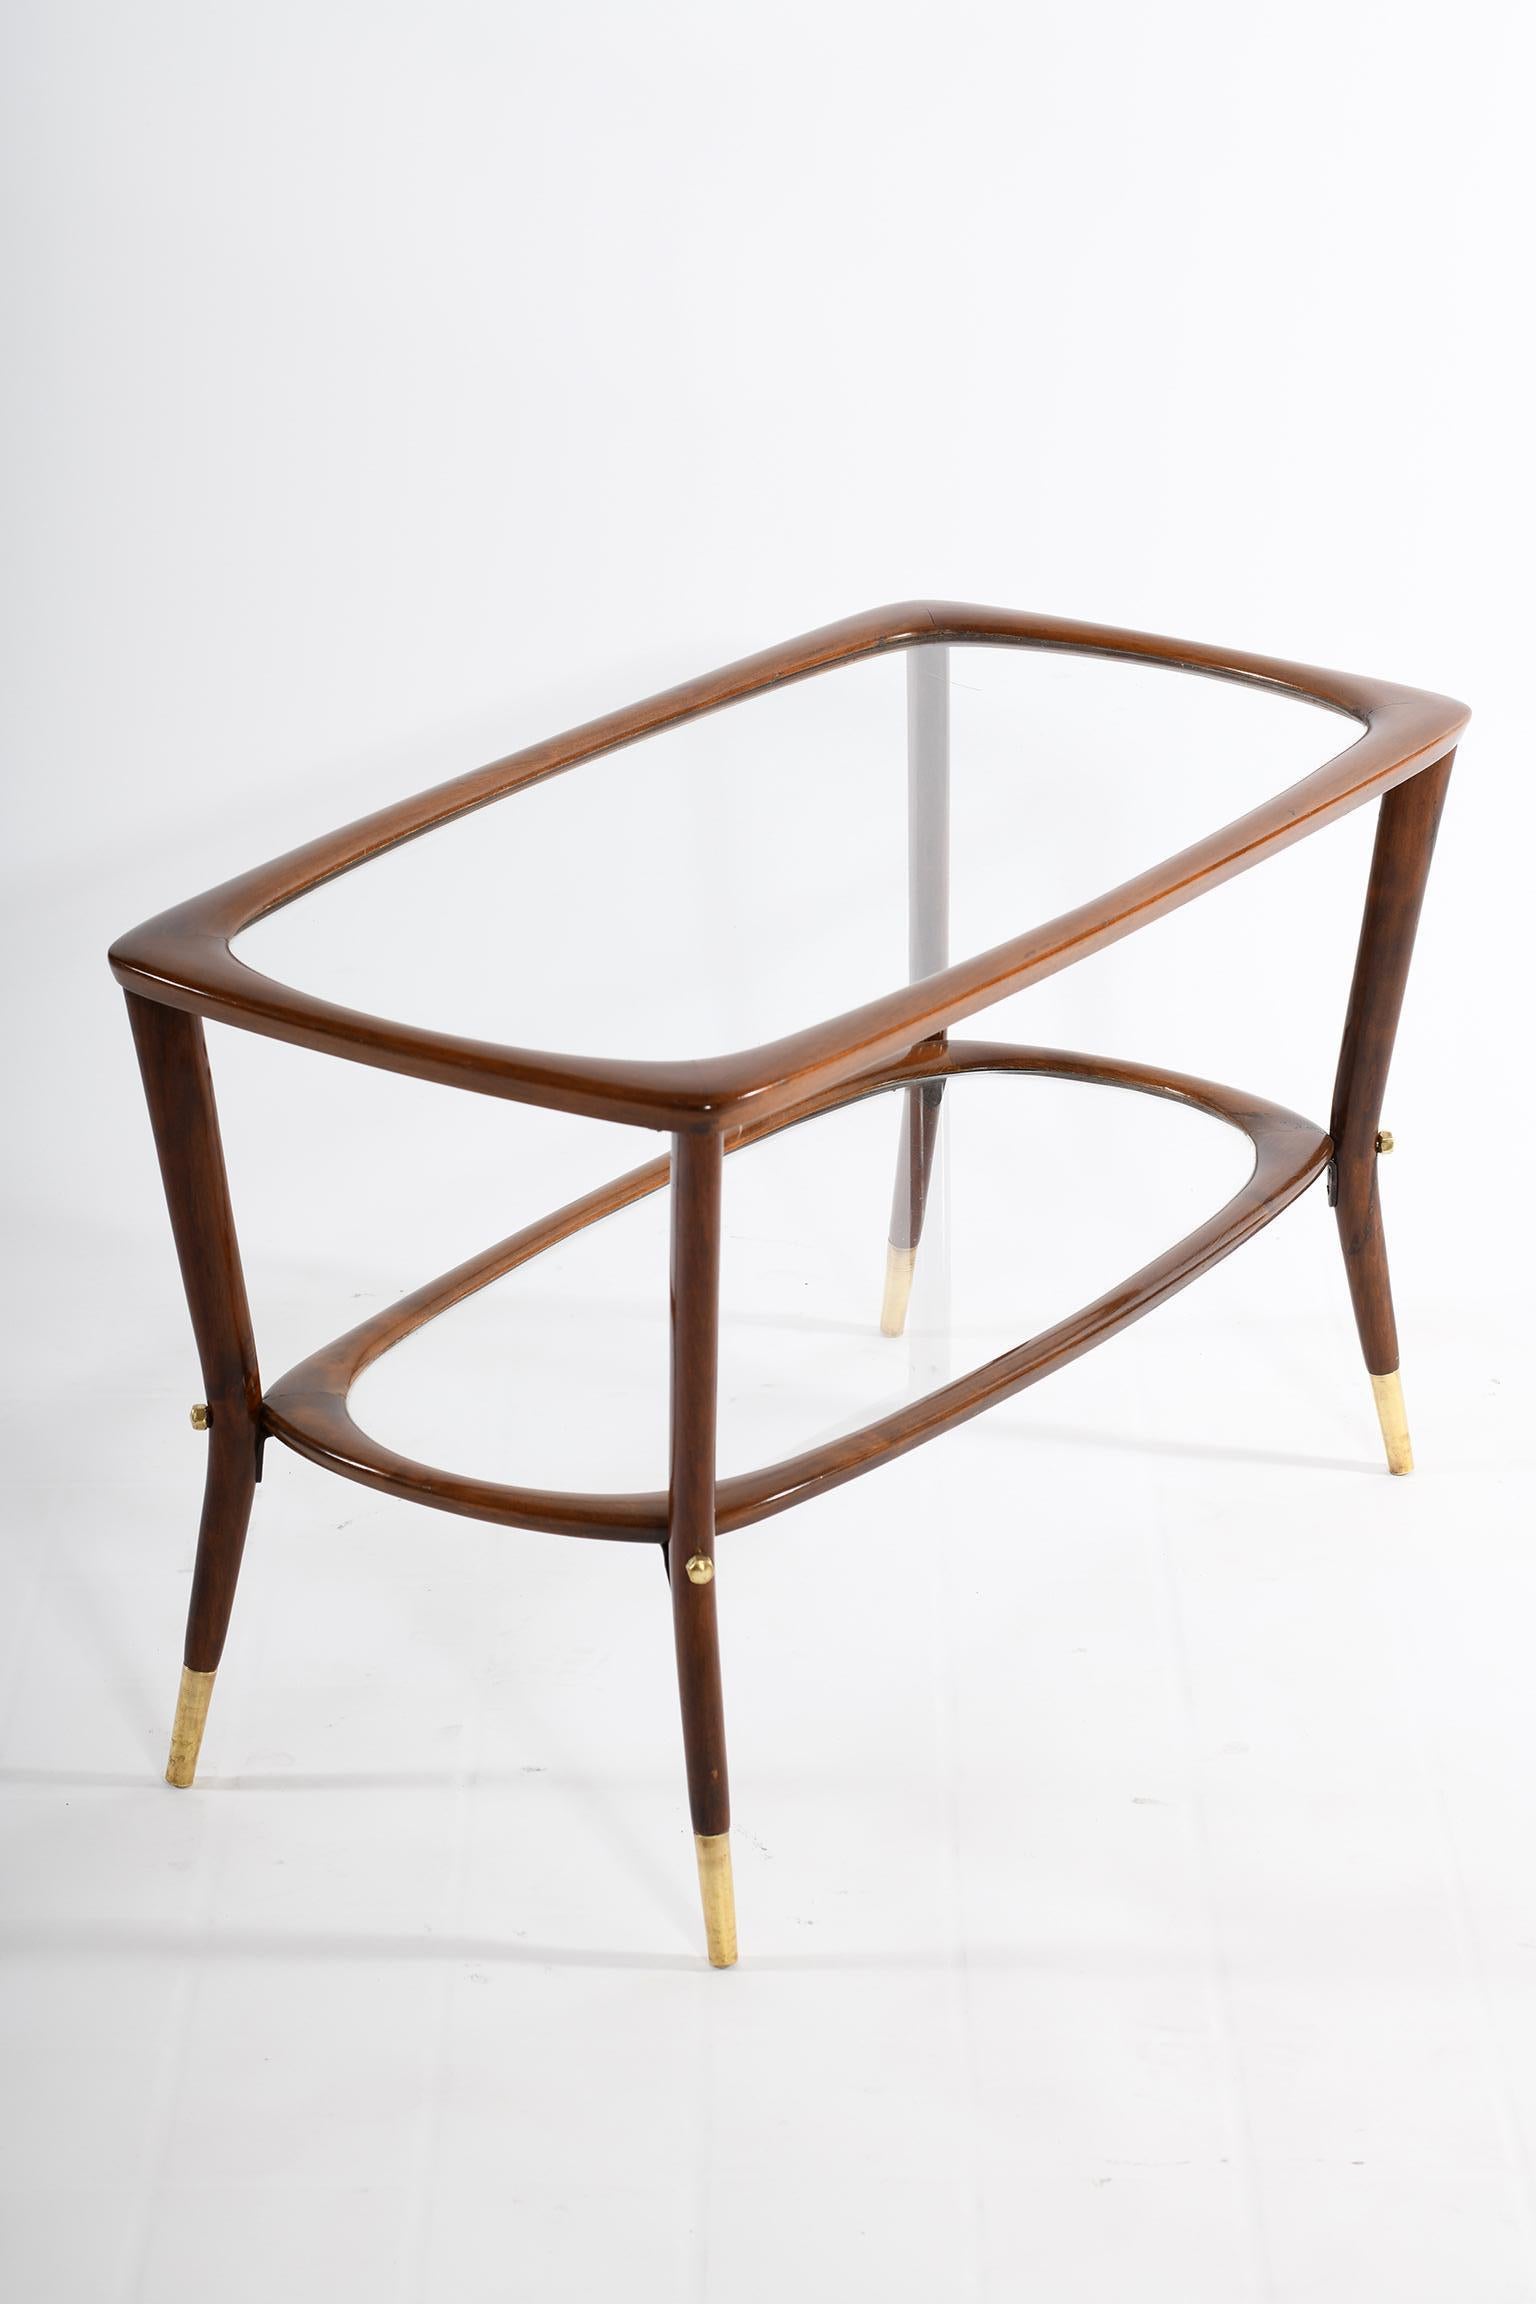 Midcentury Italian coffee table with underlying glass shelf for books and magazines, rounded structure in solid walnut with brass details and feet.
The size of this table and the proportion are very interesting, as well as the light and functional